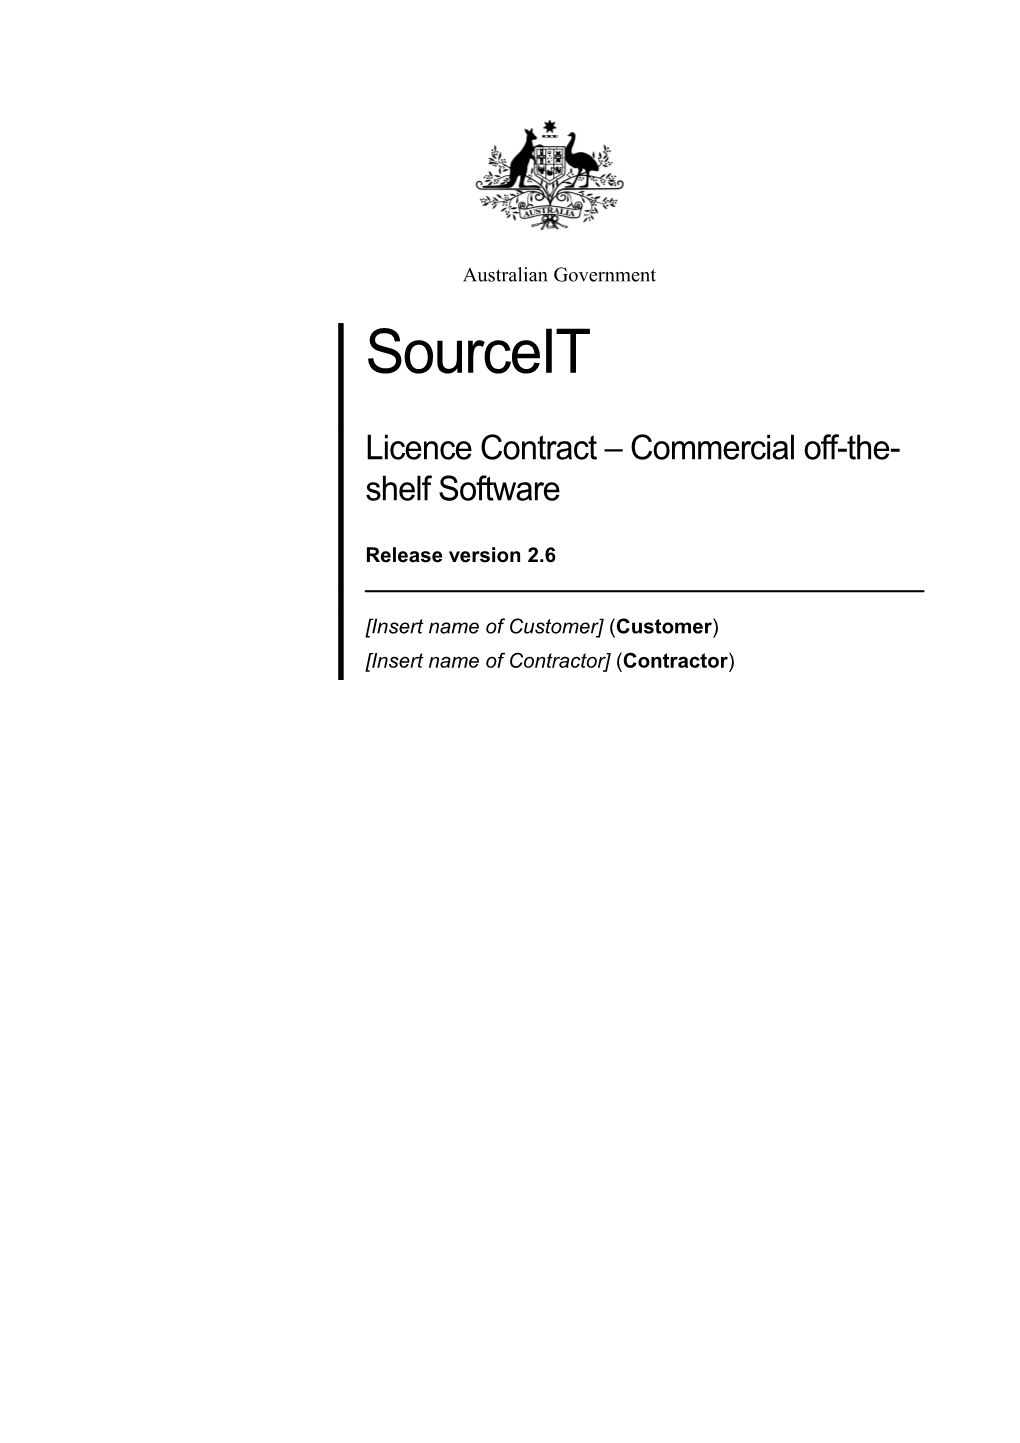 Source IT Licence (Only) Contract - Commercial Off-The-Shelf Software - Release Version 2.3